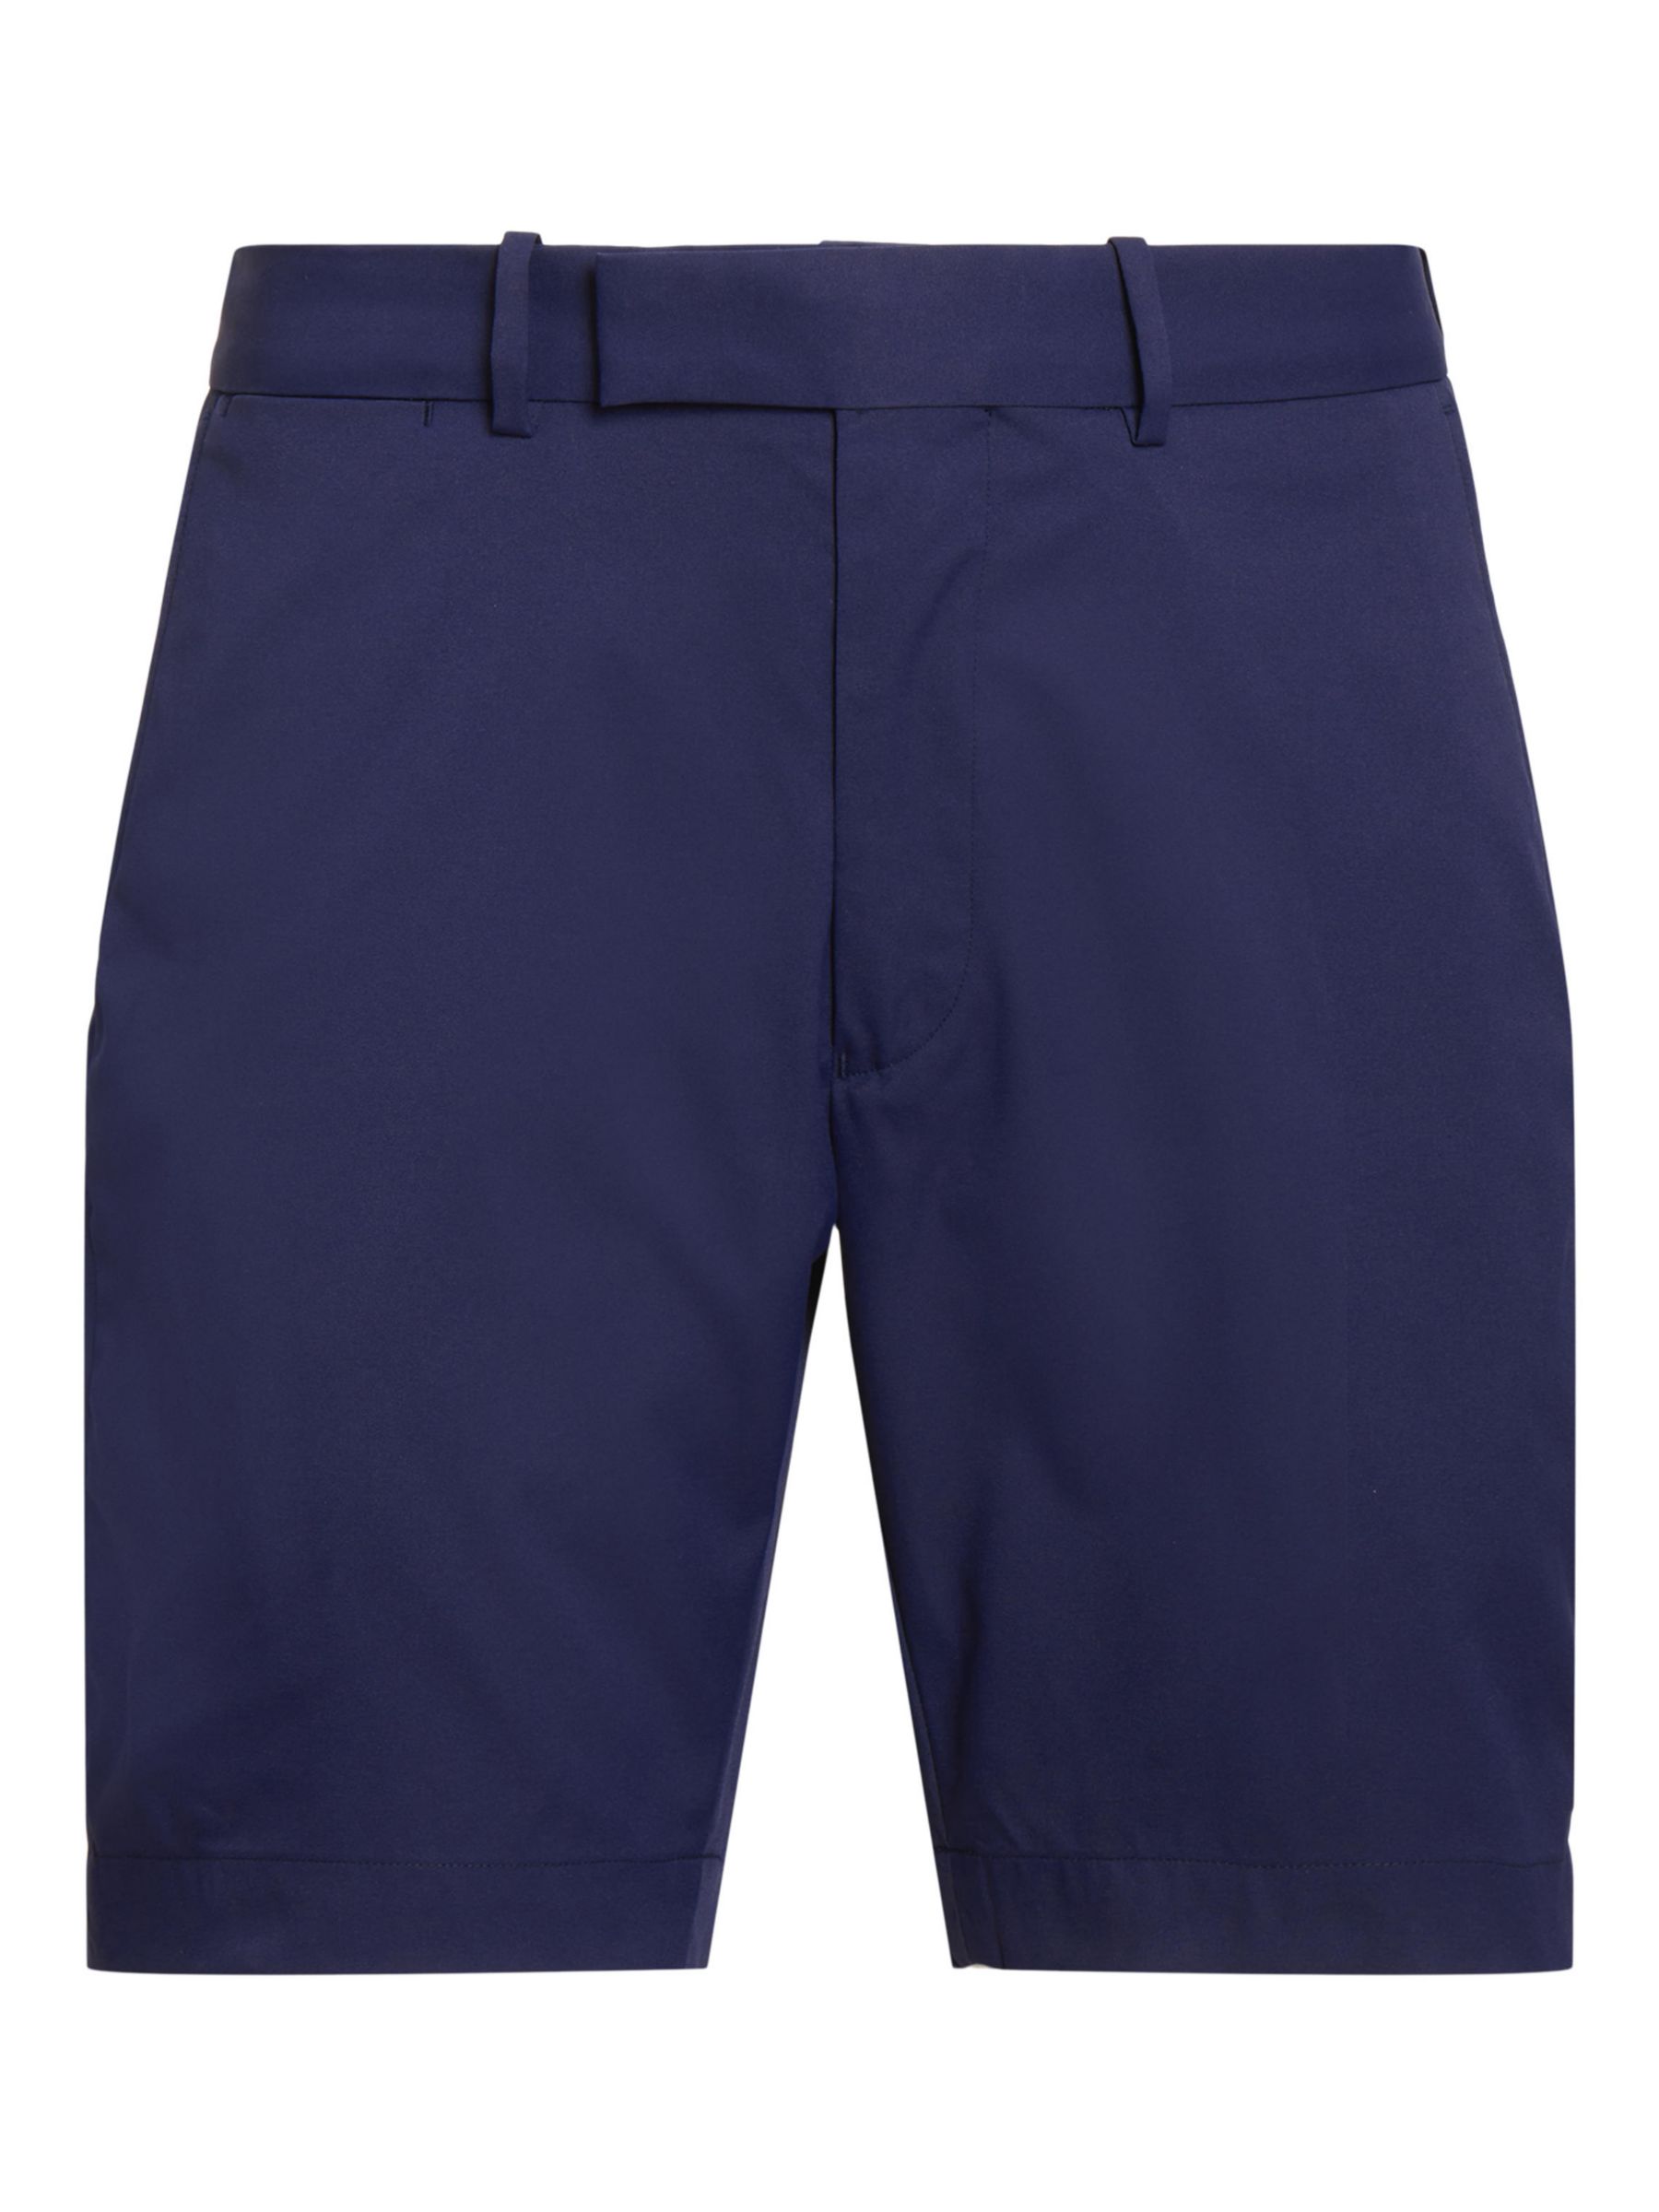 Polo Golf by Ralph Lauren RLX Shorts, French Navy, 30R